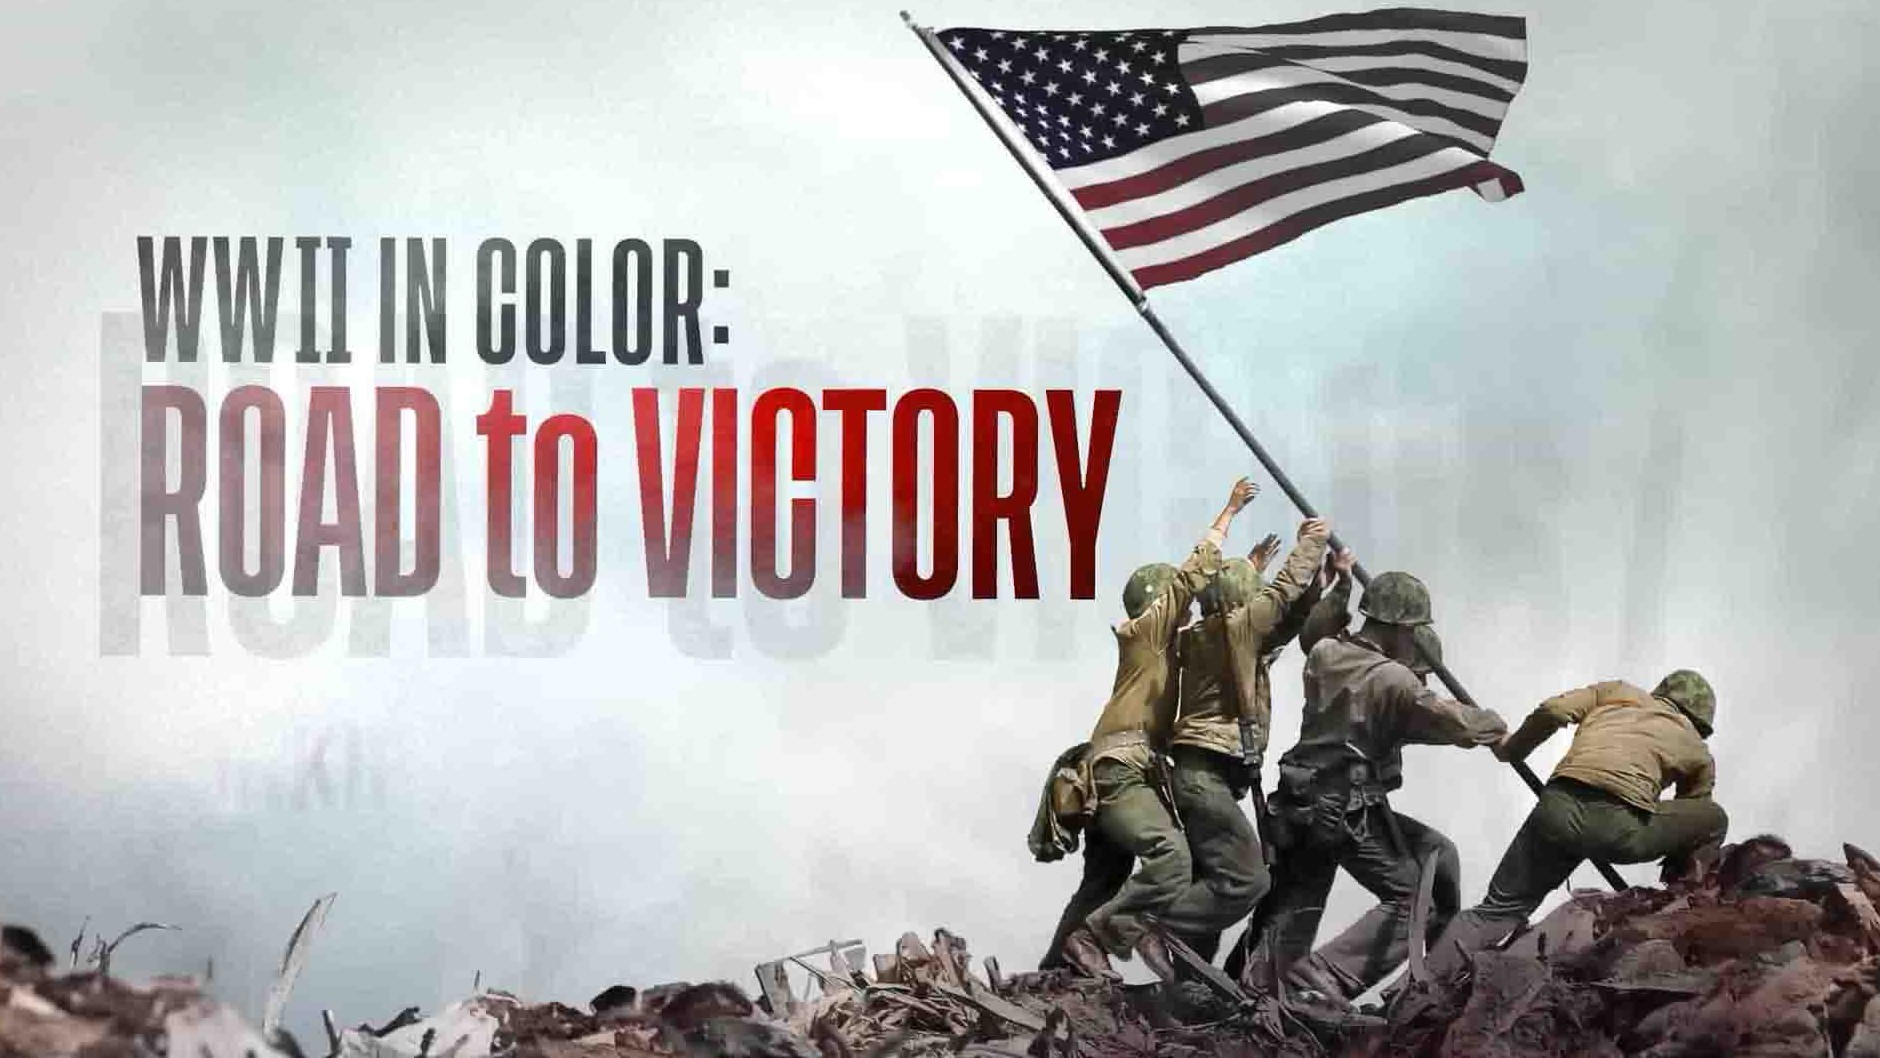 Netflix纪录片《彩色二战：胜利之路 WWII in Color: Road to Victory 2021》全10集 英语中字 1080P高清网盘下载